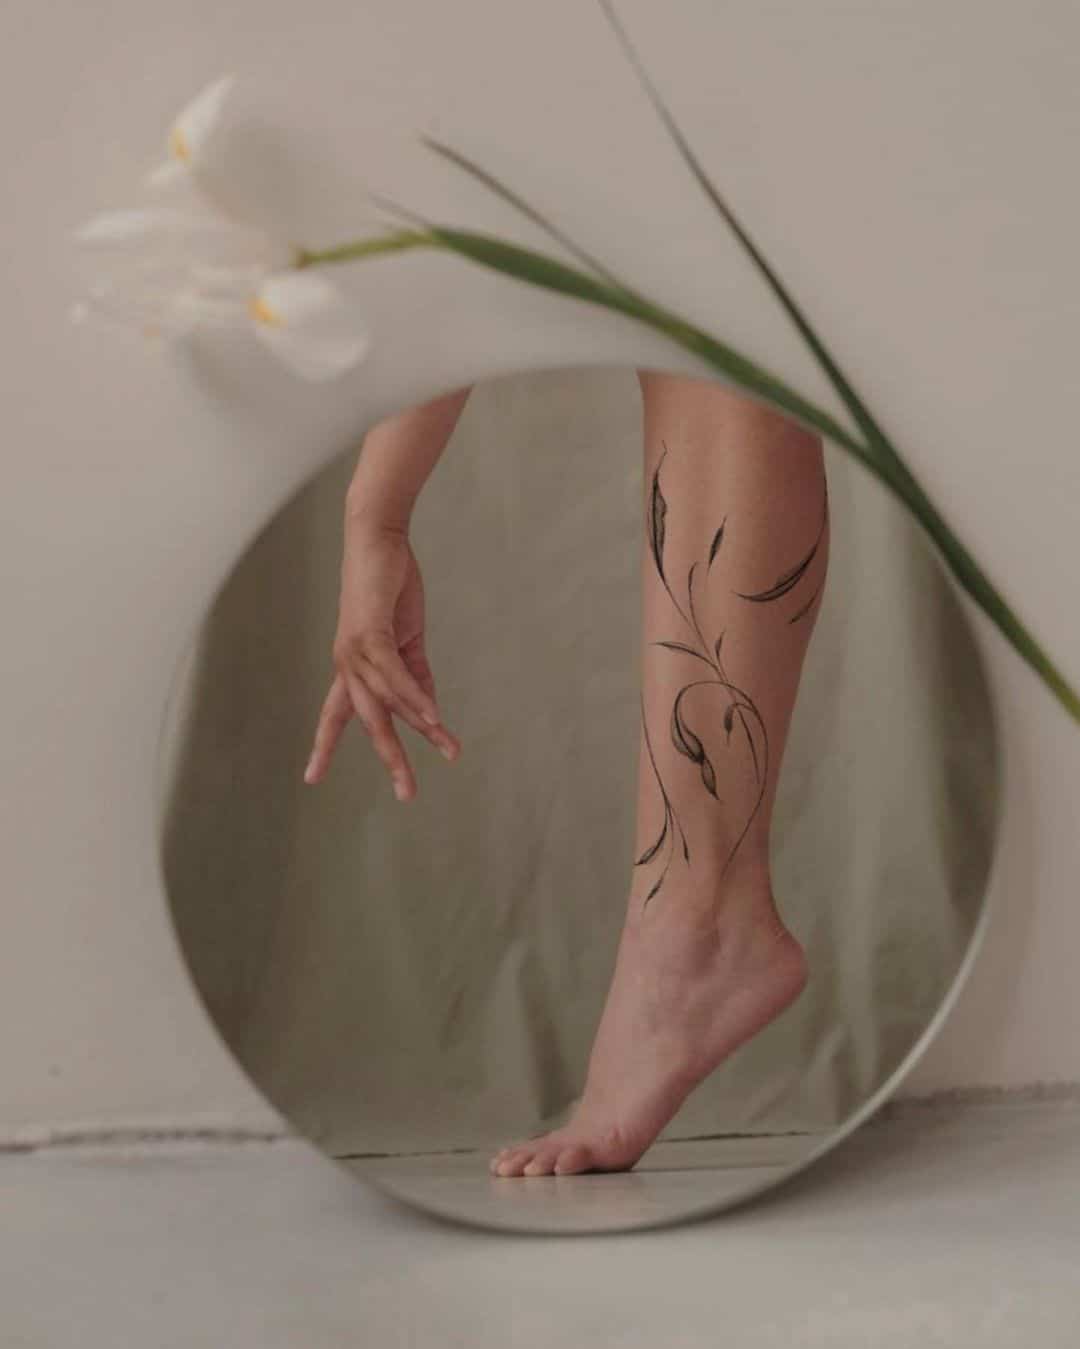 flowing flower tattoo on the legs of a woman